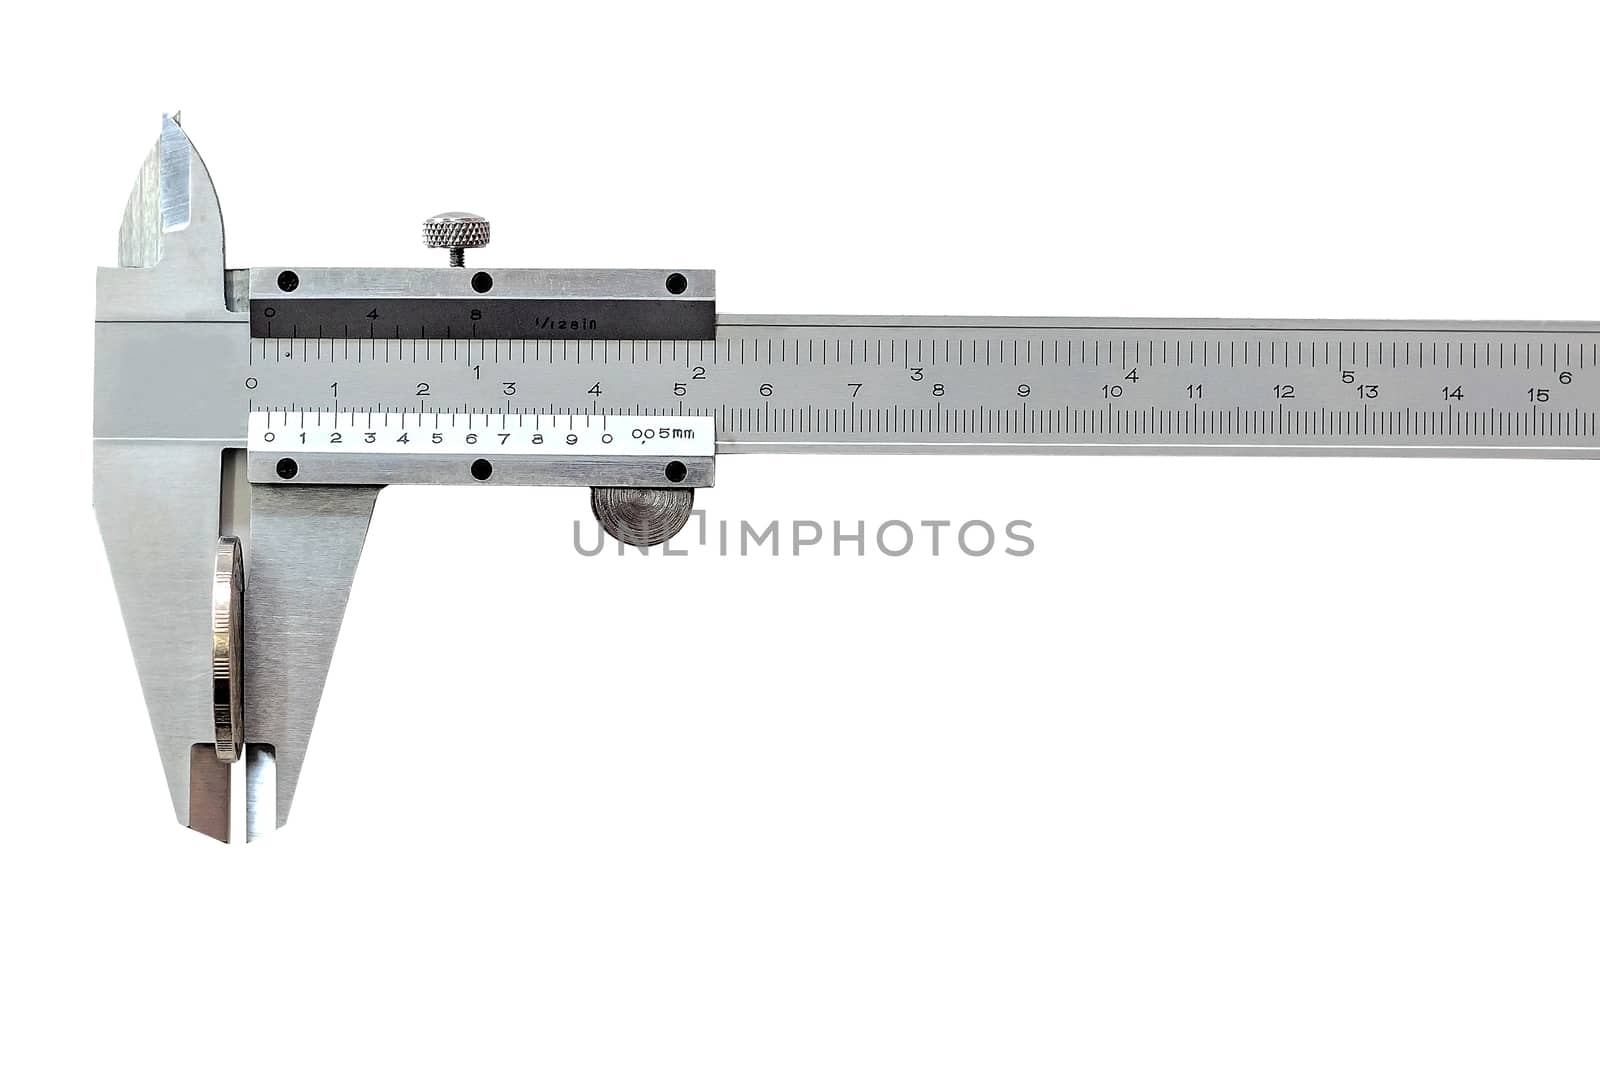 Vernier caliper is an indispensable tool in industrial applications for measuring the length, thickness, and depth of work pieces with precision, isolated on white background with clipping path.